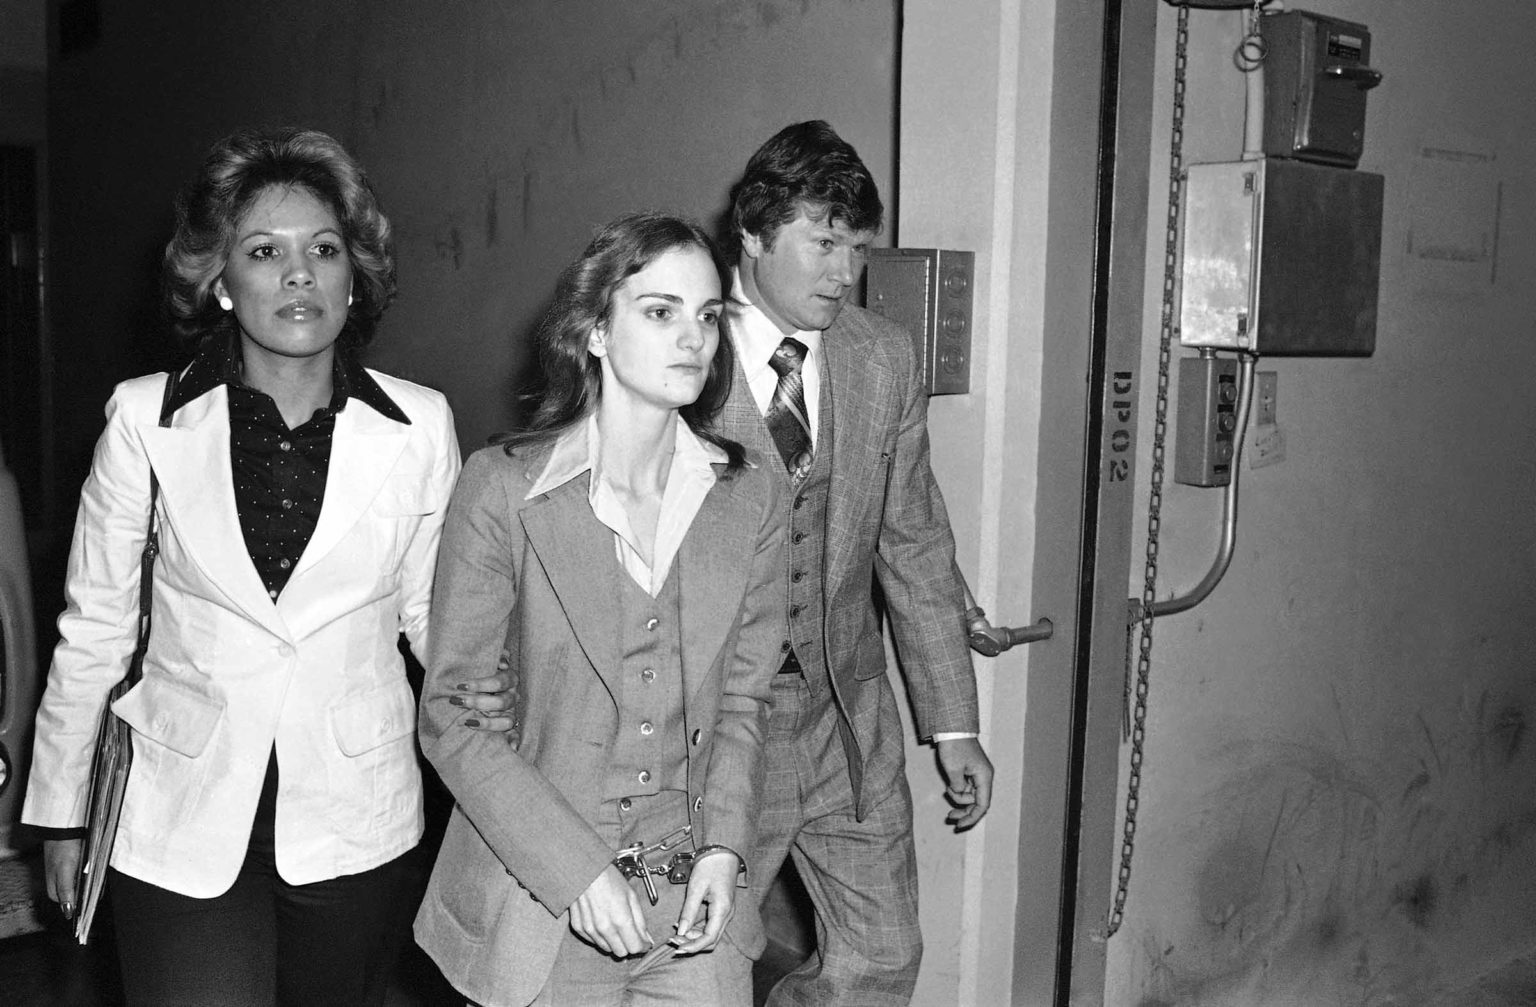 Heiress to the Hearst media empire, Patty Hearst and her parents experienced the dangers of wealth after their daughter was kidnapped in 1974.